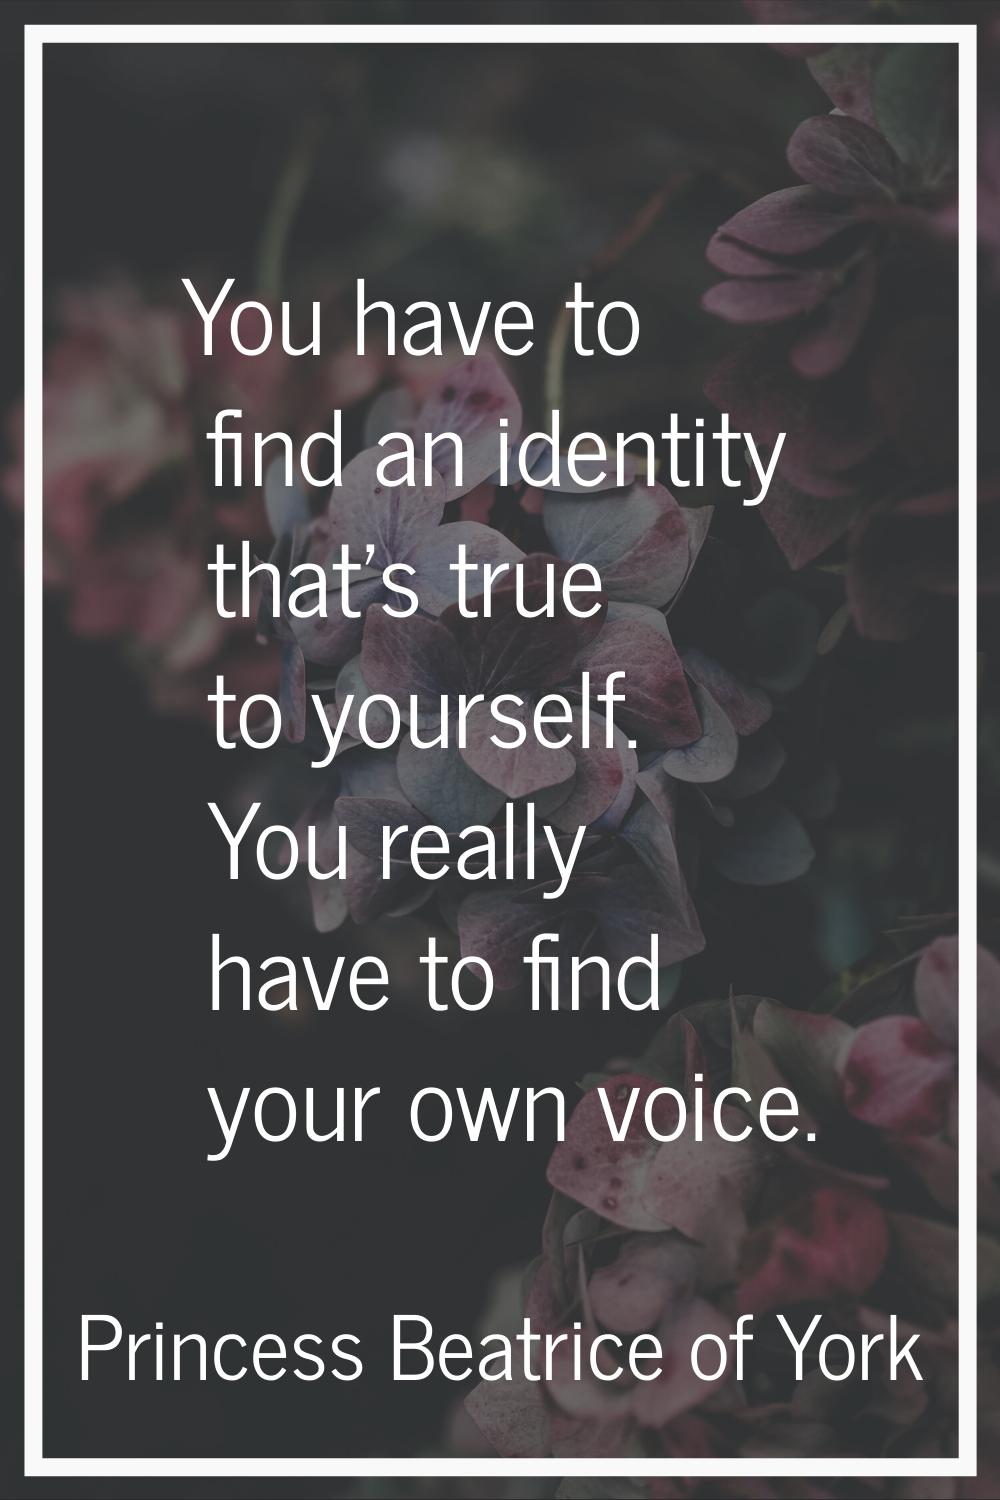 You have to find an identity that's true to yourself. You really have to find your own voice.